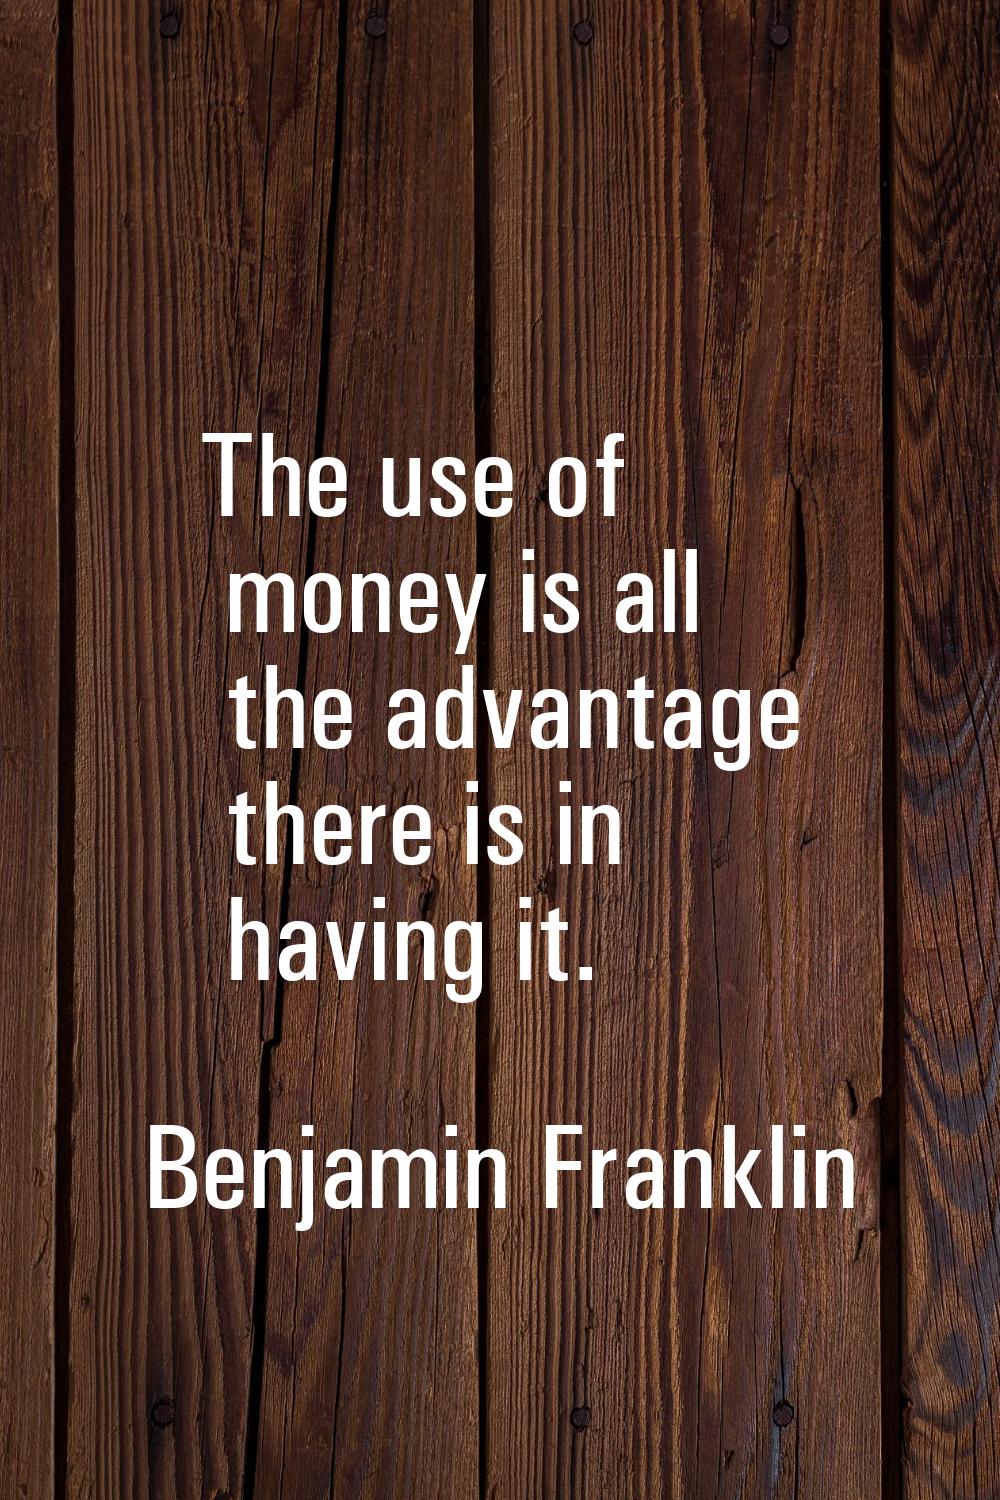 The use of money is all the advantage there is in having it.